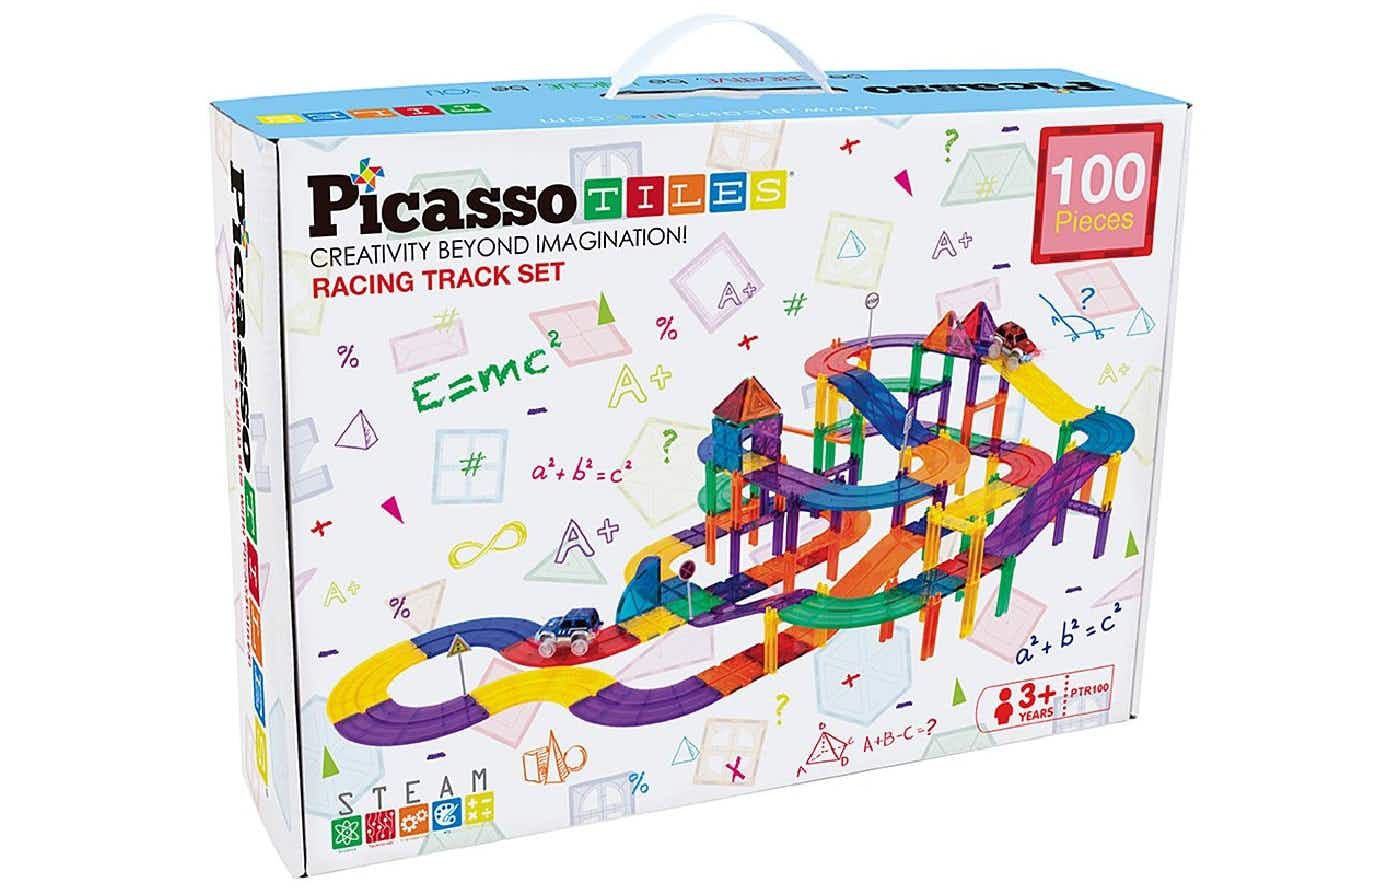 zulily-picasso-race-track-2021-2